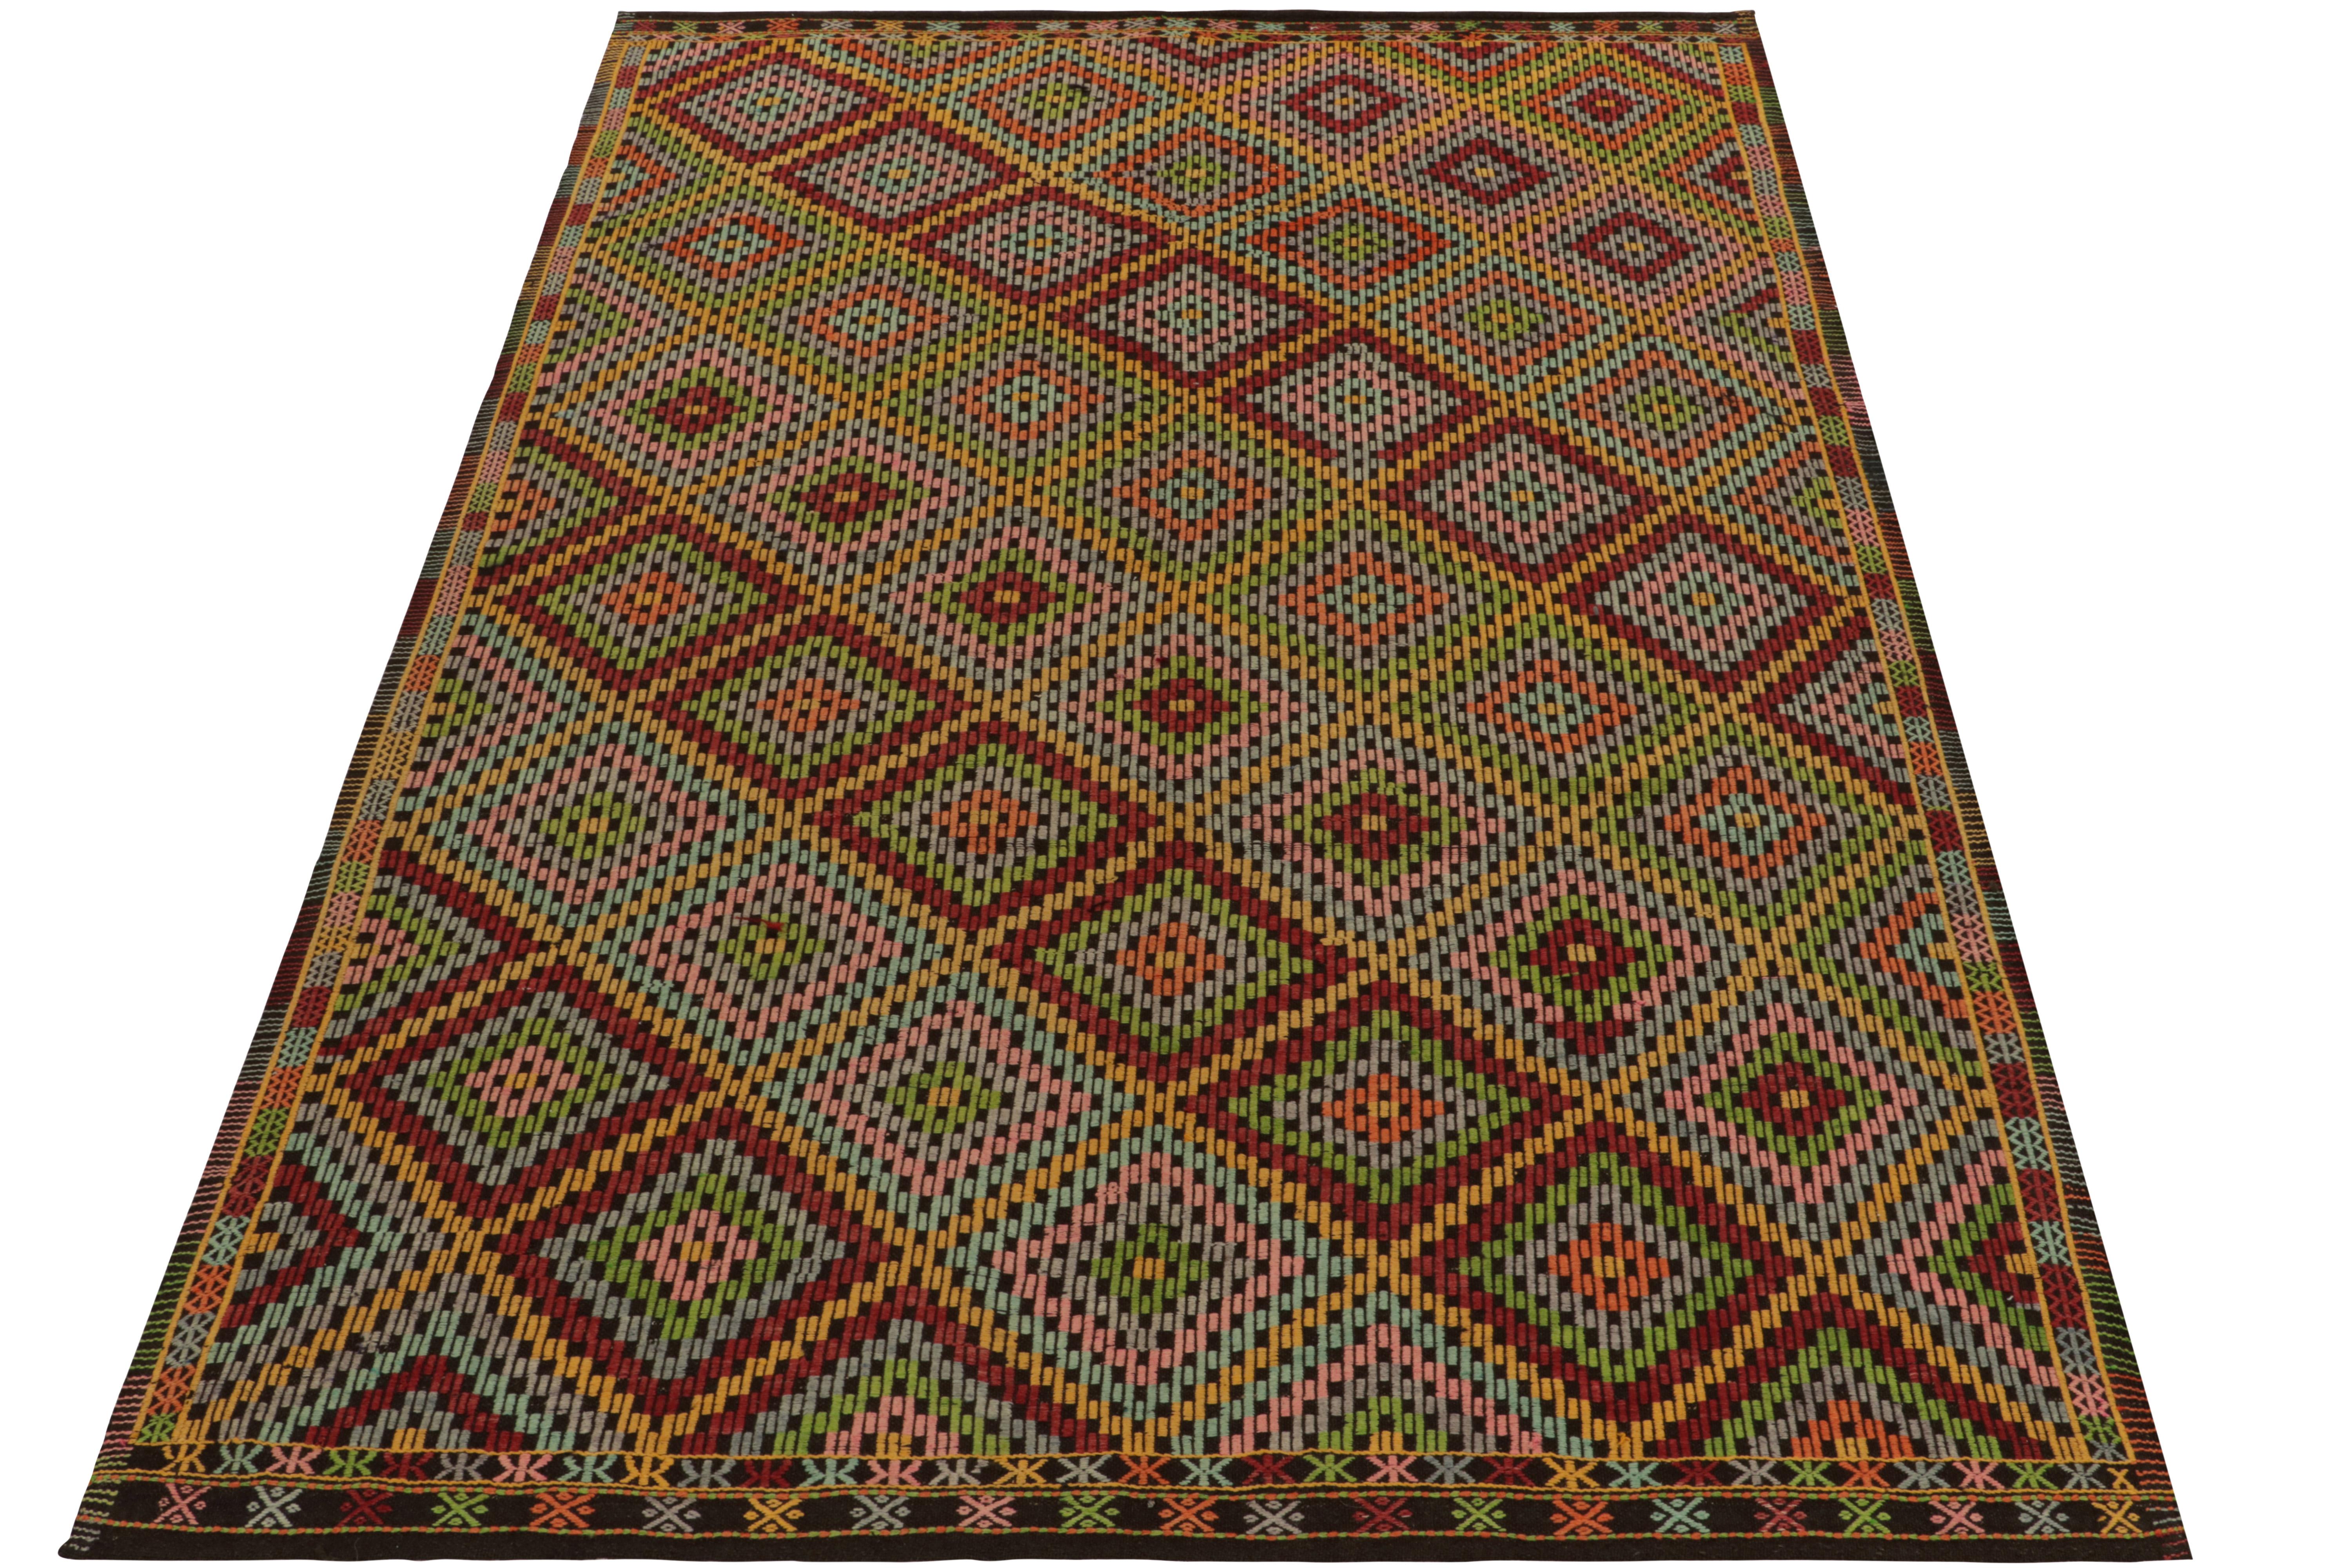 Inspired by the celebrated Kurdish style, this 7x10 Cecim kilim rug of Anatolian sensibility enjoys a prestigious position in our tribal collection. This vintage mid-century flatweave from Turkey features an embroidered lattice pattern manifesting